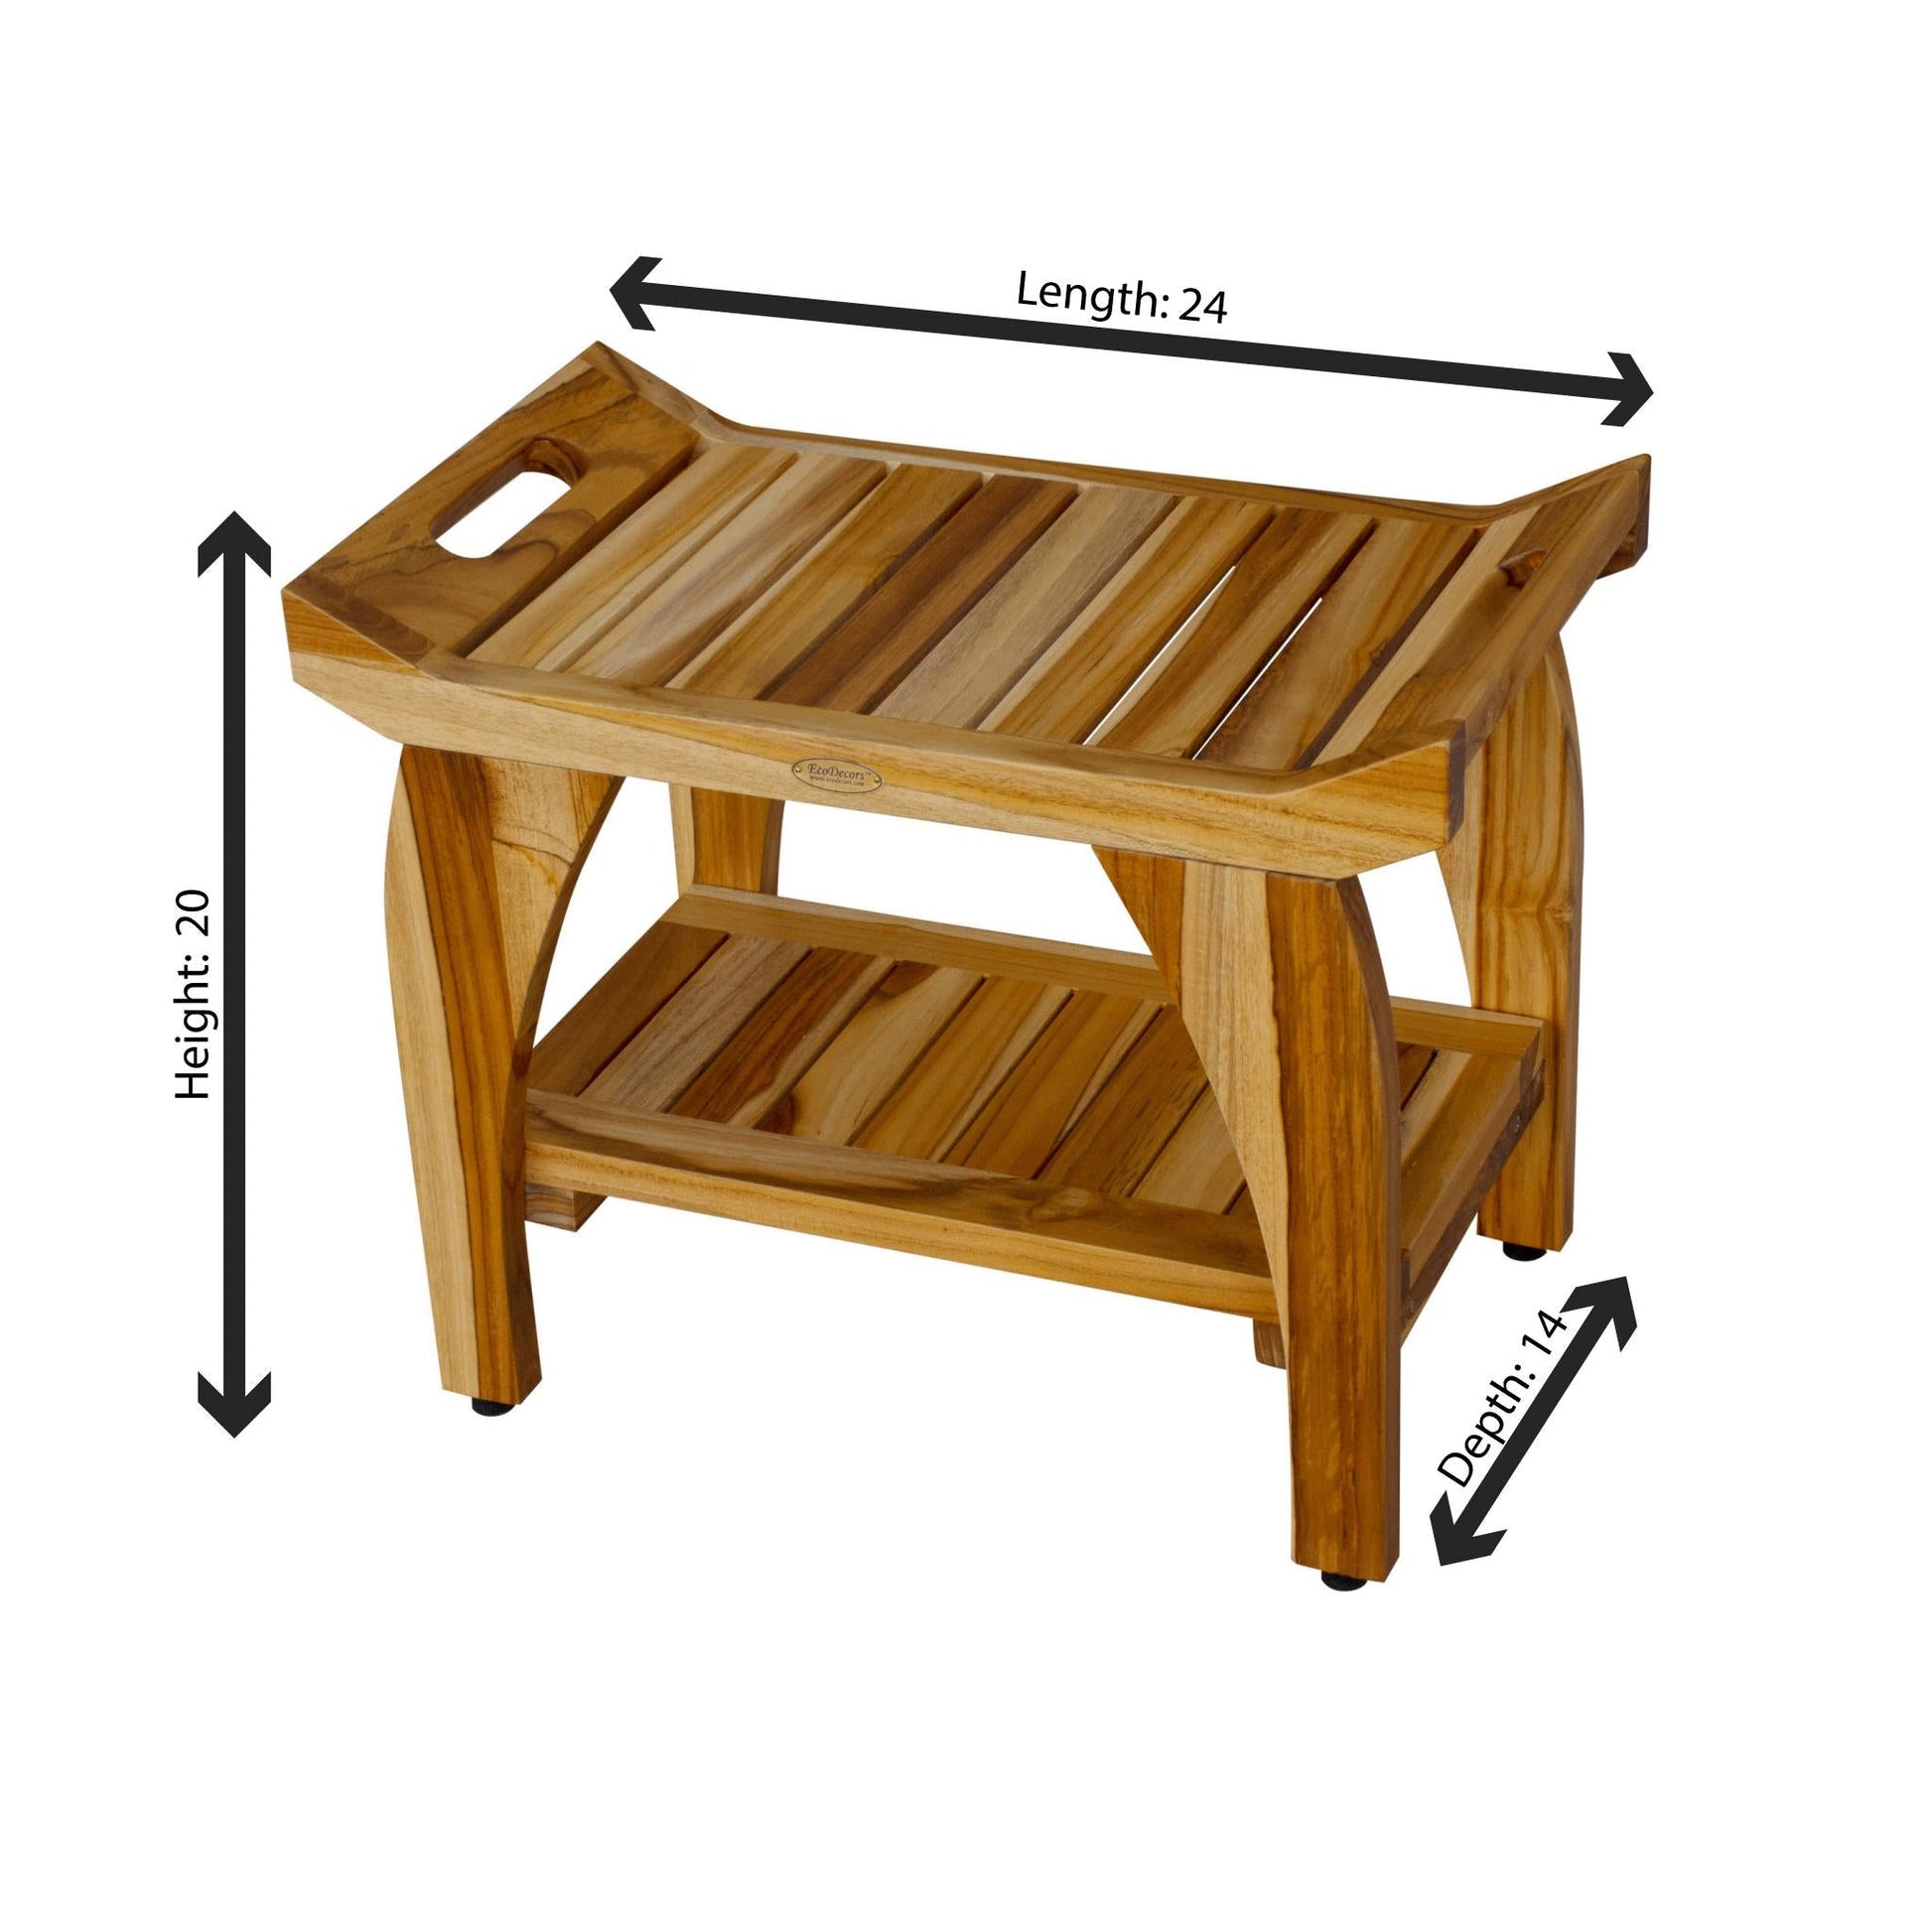 https://usbathstore.com/cdn/shop/files/EcoDecors-Tranquility-24-EarthyTeak-Solid-Teak-Wood-Shower-Bench-With-Shelf-and-LiftAide-Arms-11.jpg?v=1694729308&width=1946